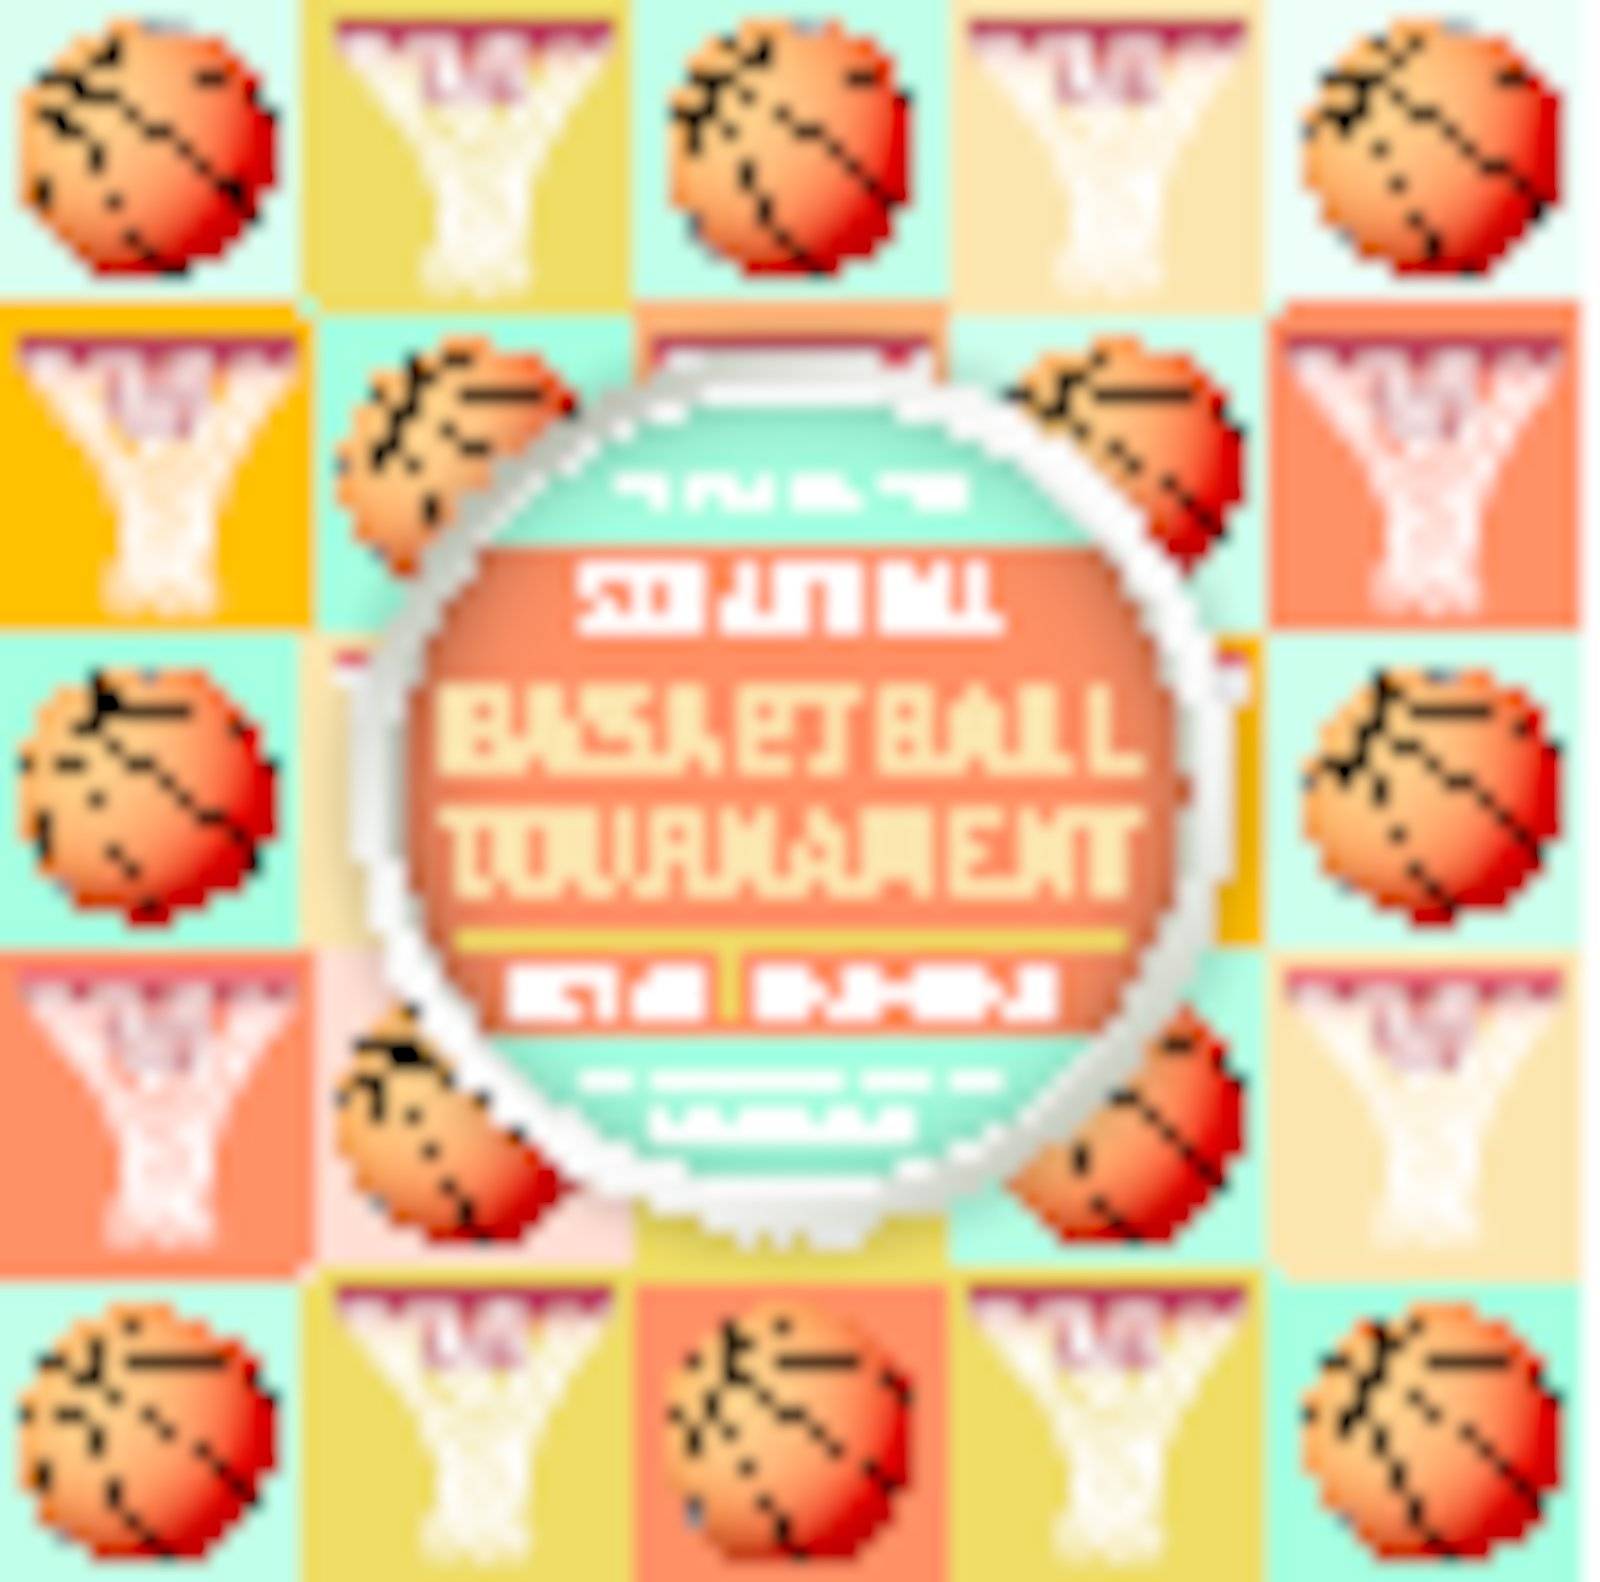 A basketball tournament flyer or poster perfect for basketball announcements, games, tournaments, camps, and more. Vector EPS 10 available. EPS file is layered for separation of text from the background. EPS contains transparencies.